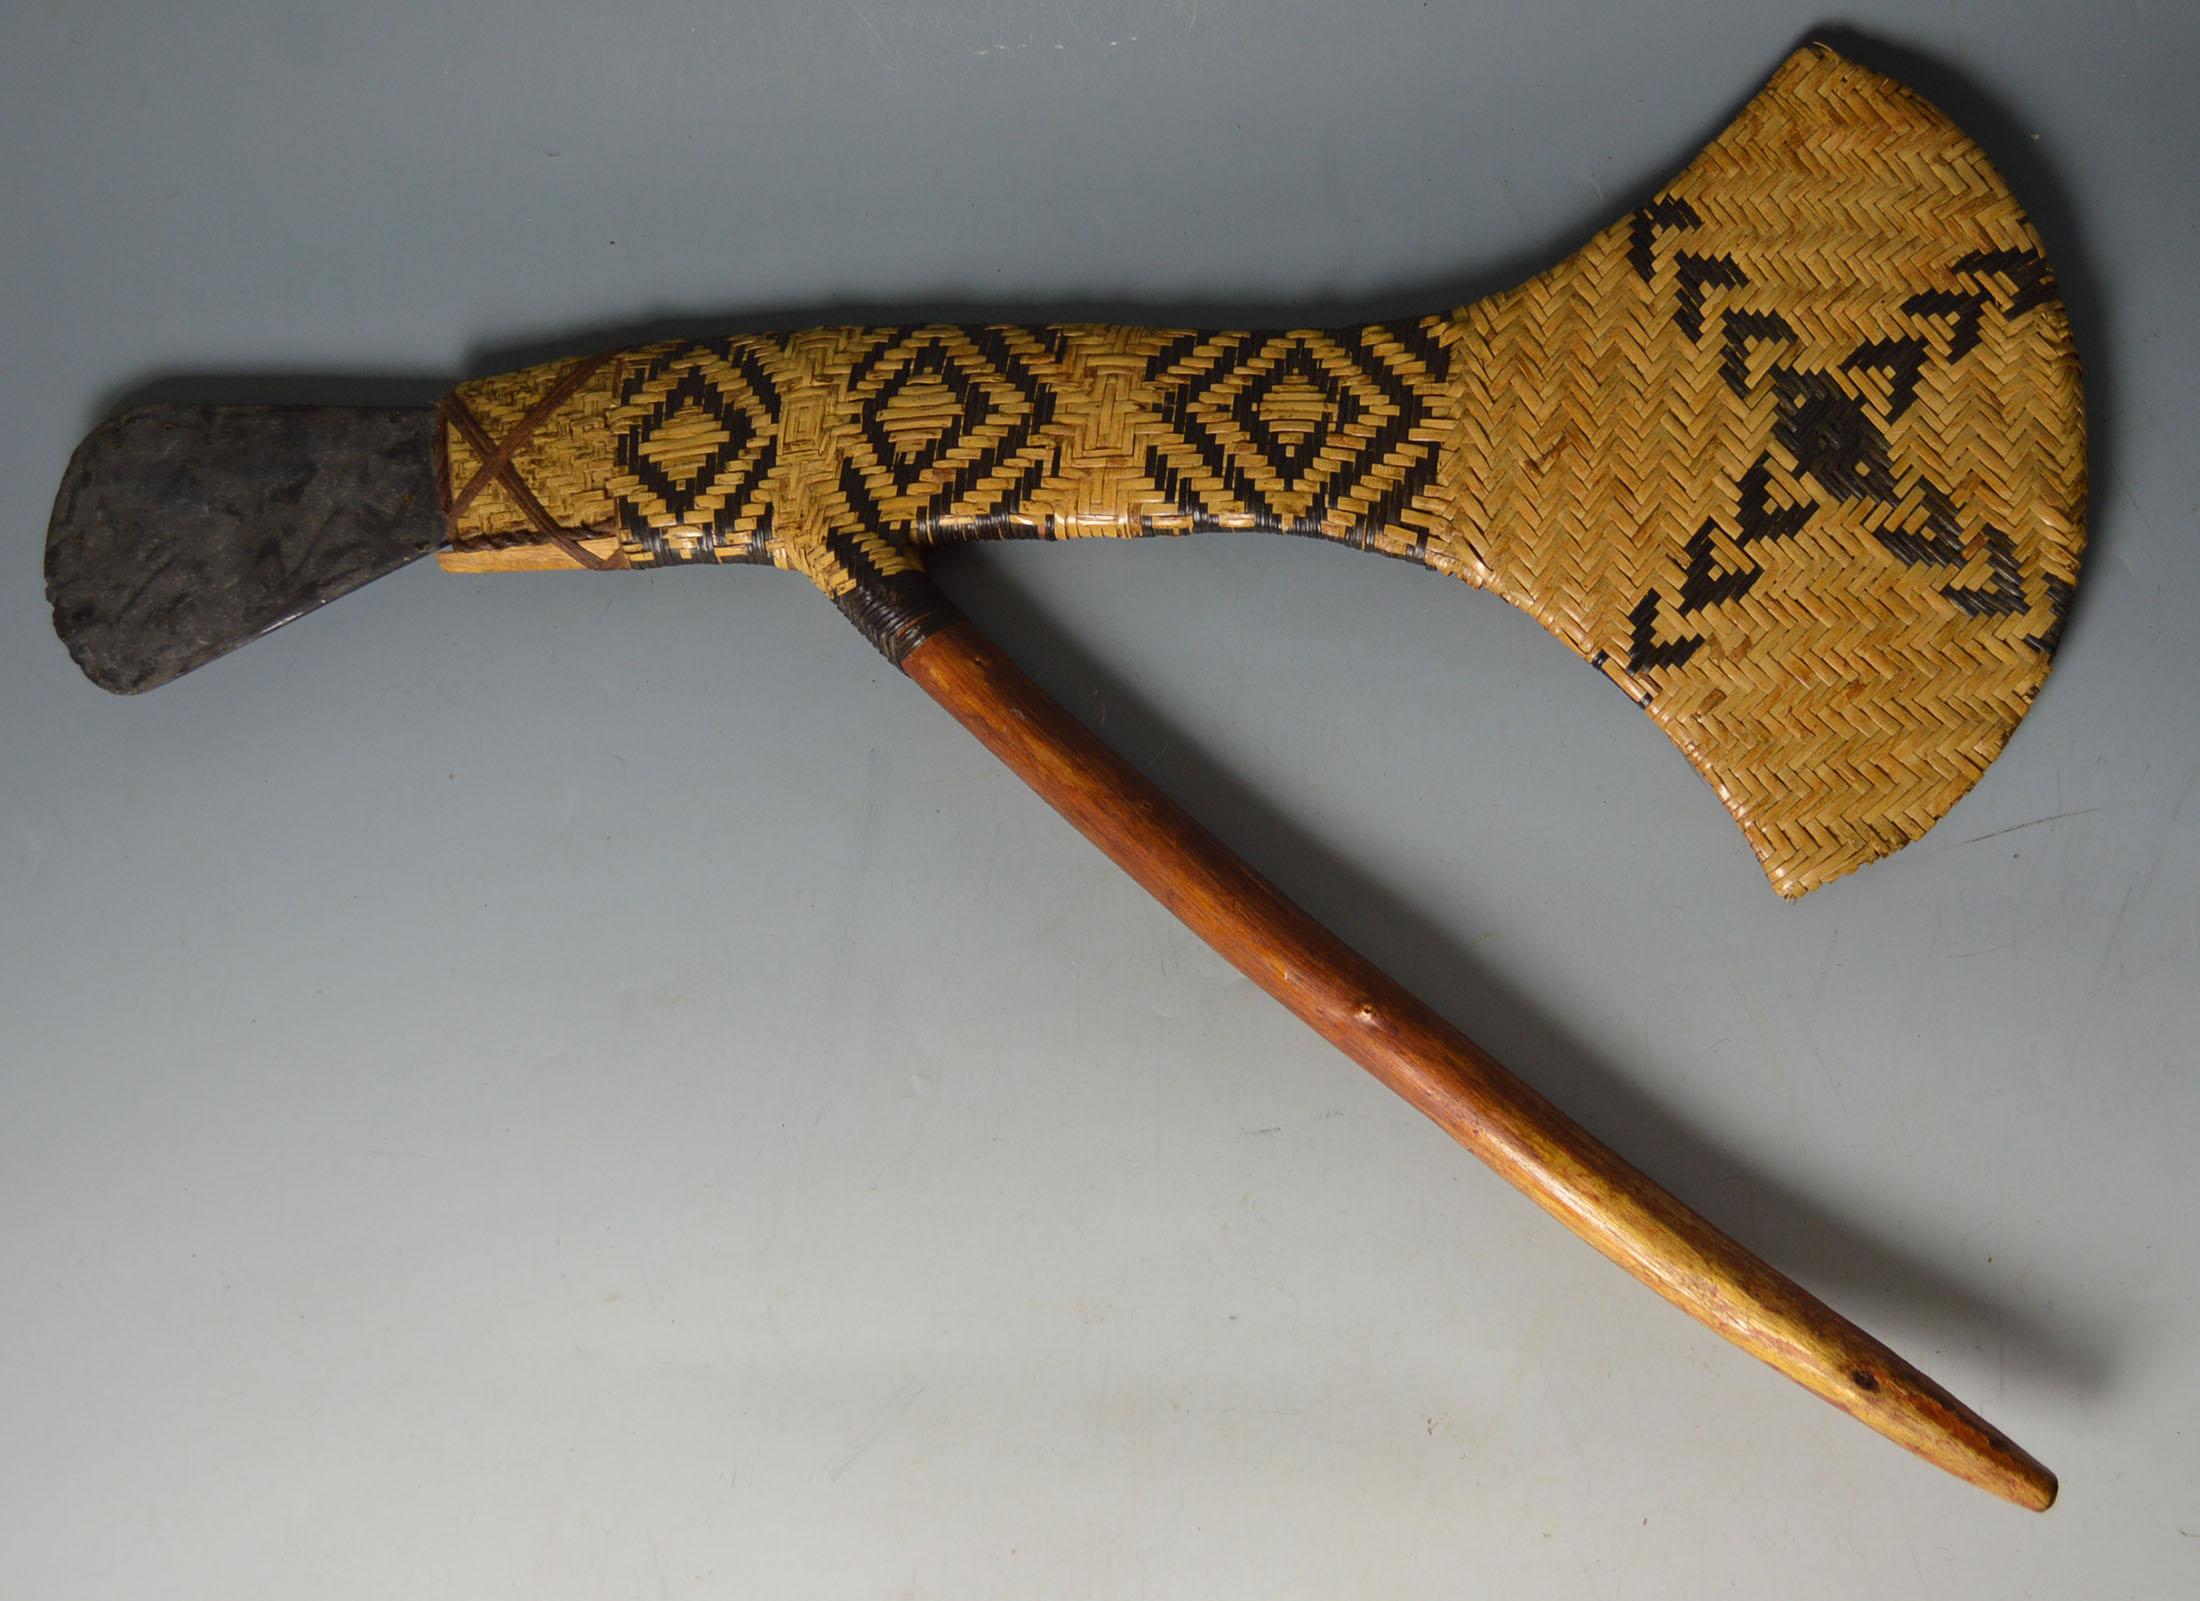 Large Exquisitely crafted  Oceanic Presentation Axe 
Papua New Guinea  Eastern Highlands  Wahgi Valley  Mount Hagen region.
 
Mount Hagen ceremonial axe,   woven rattan, bicoloured in geometric patterns; the wooden handle attached at an angle with a